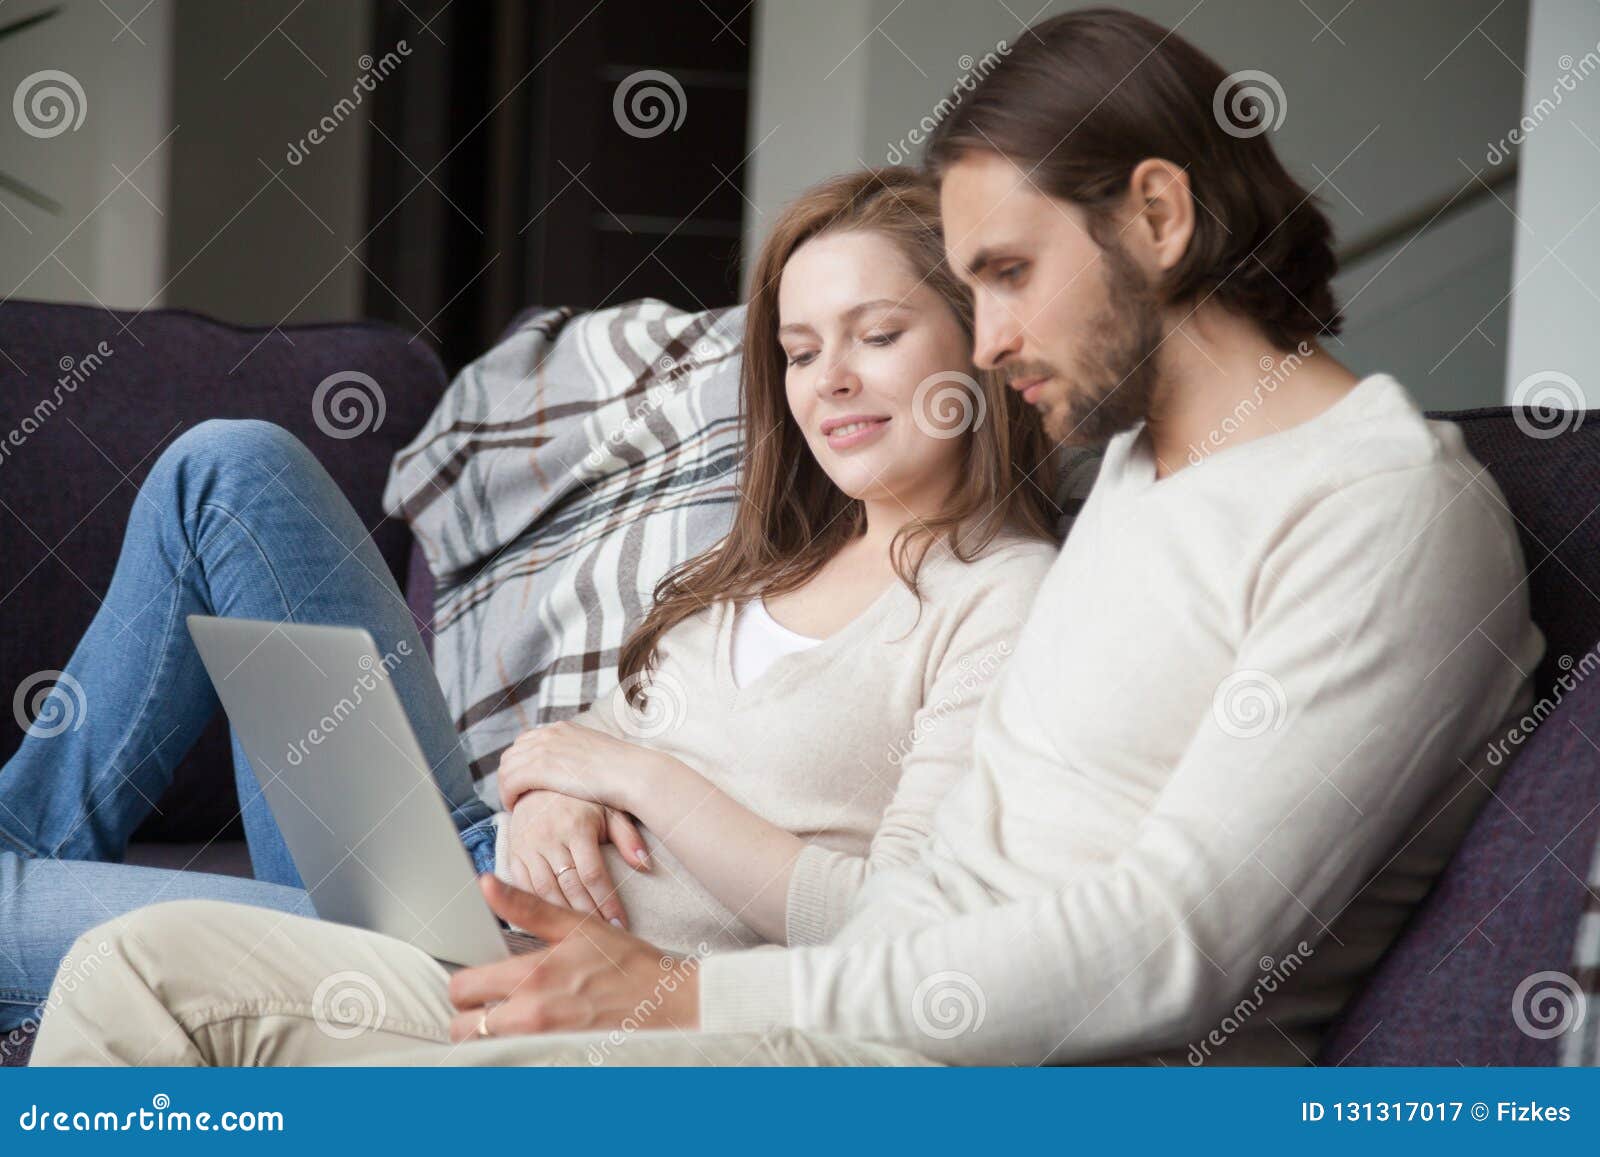 Couple Sitting Together On Couch Using Laptop Stock Image